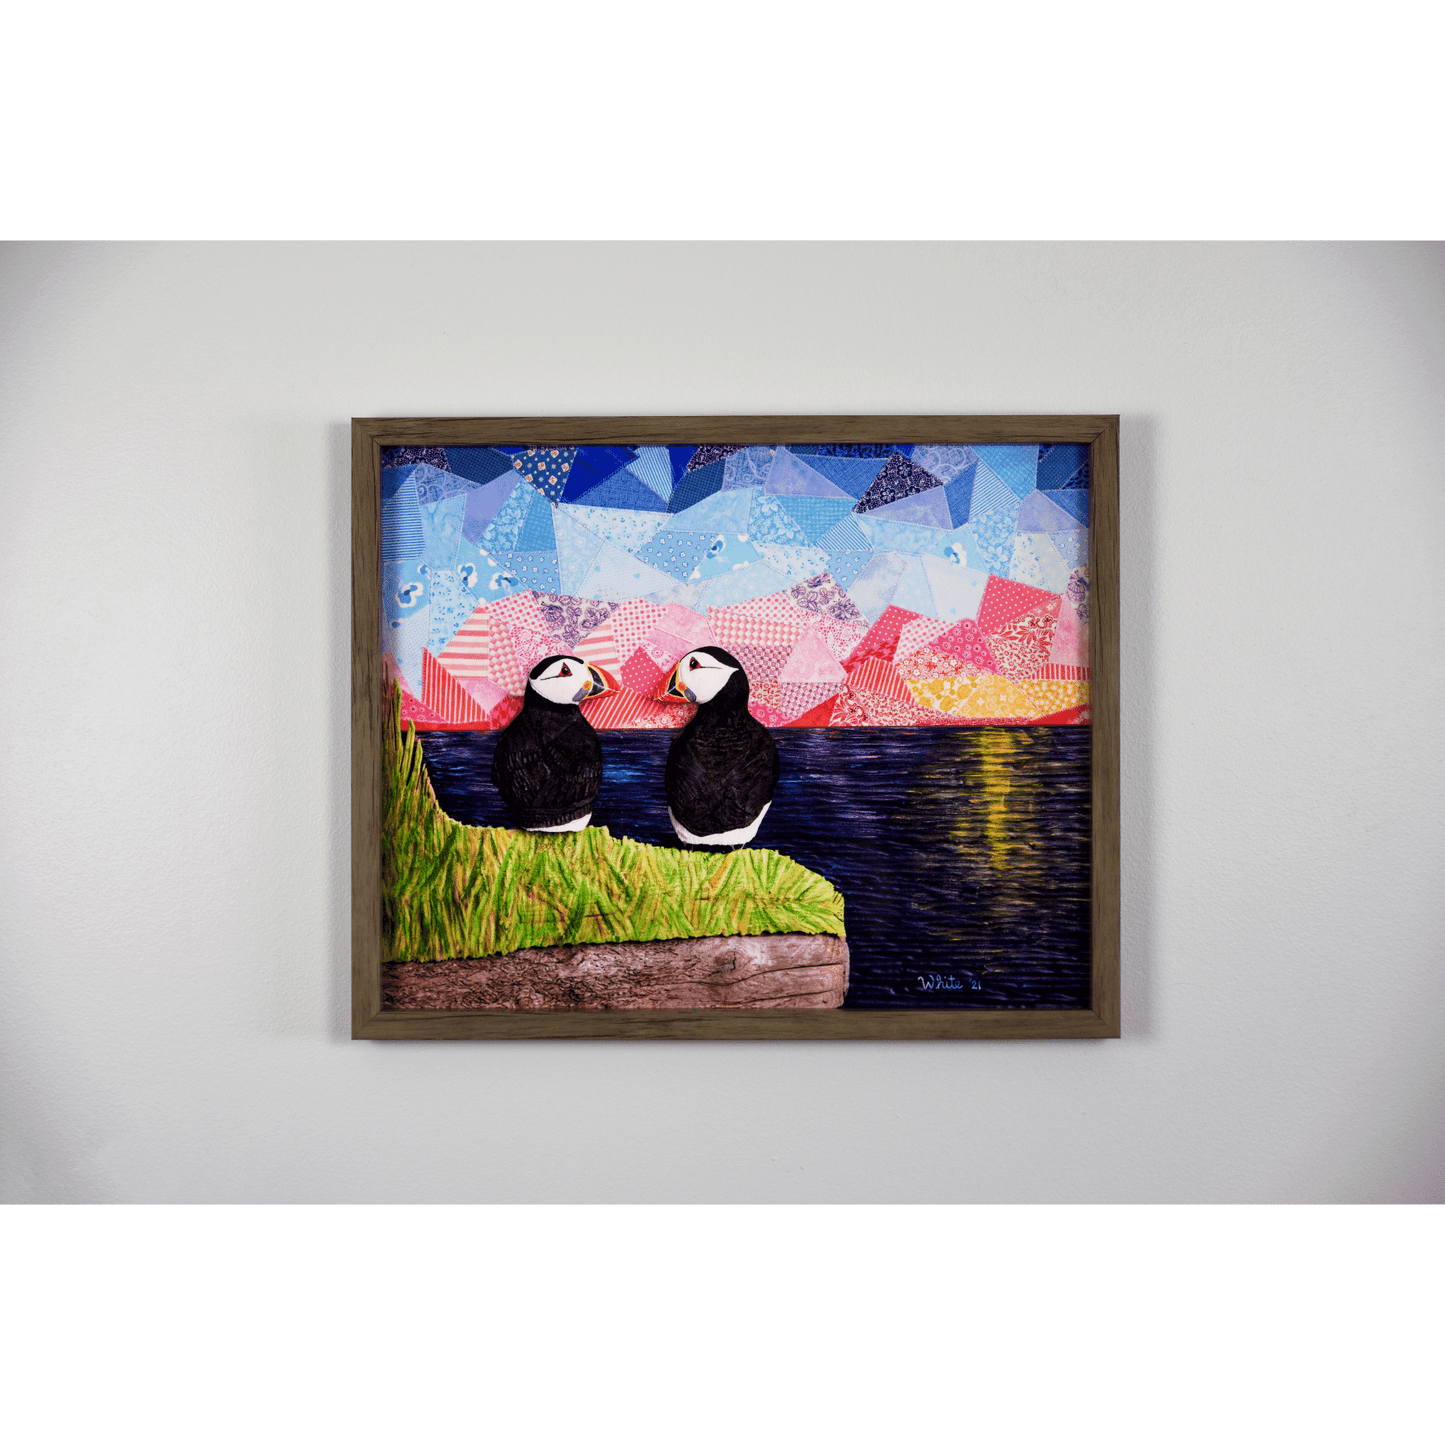  "The Perfect View" reproduction print showcases two puffins perched on a coastal rock, gazing lovingly at each other while enjoying a sunset over the ocean.